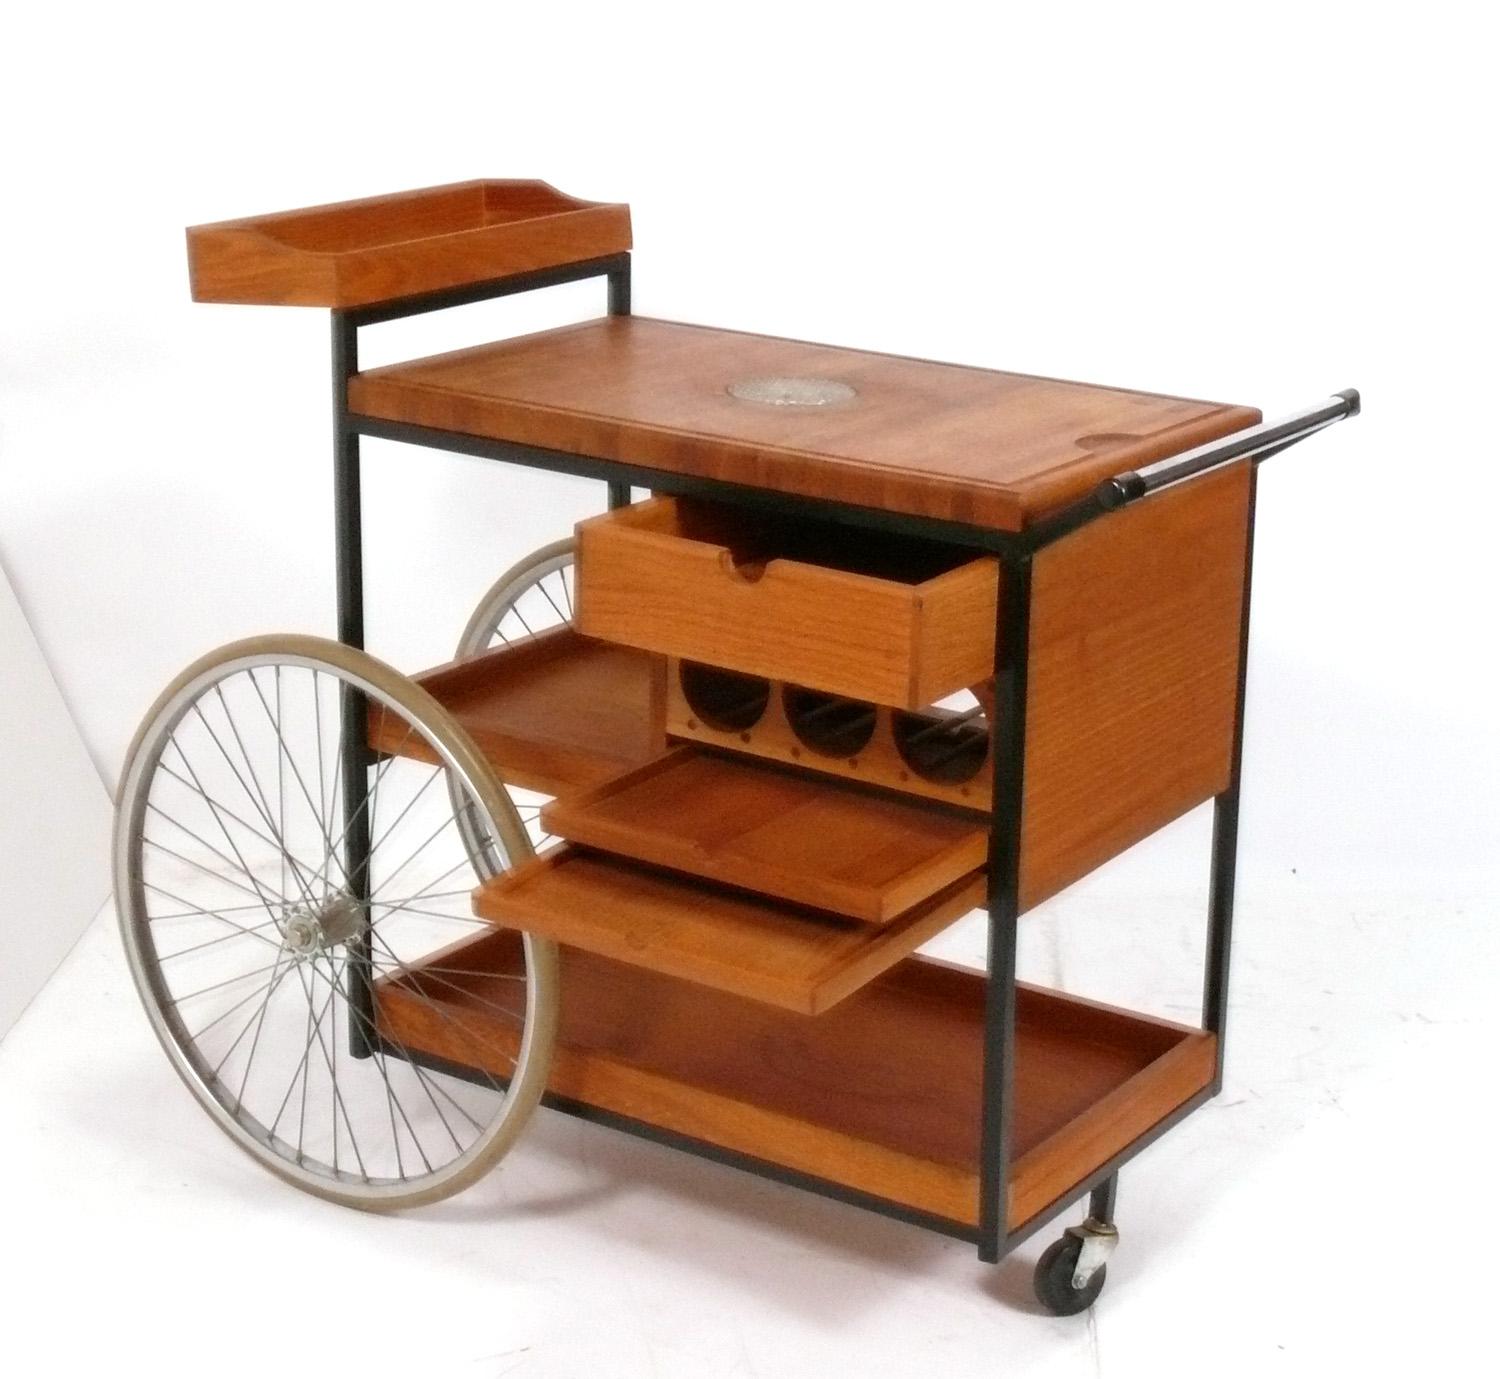 Clean Lined Organic Modern Bar Cart, designed by Arthur Umanoff, American, circa 1960s. It is a versatile size and can be used as a bar or serving cart in a living area, or as additional rolling storage in a home office. 